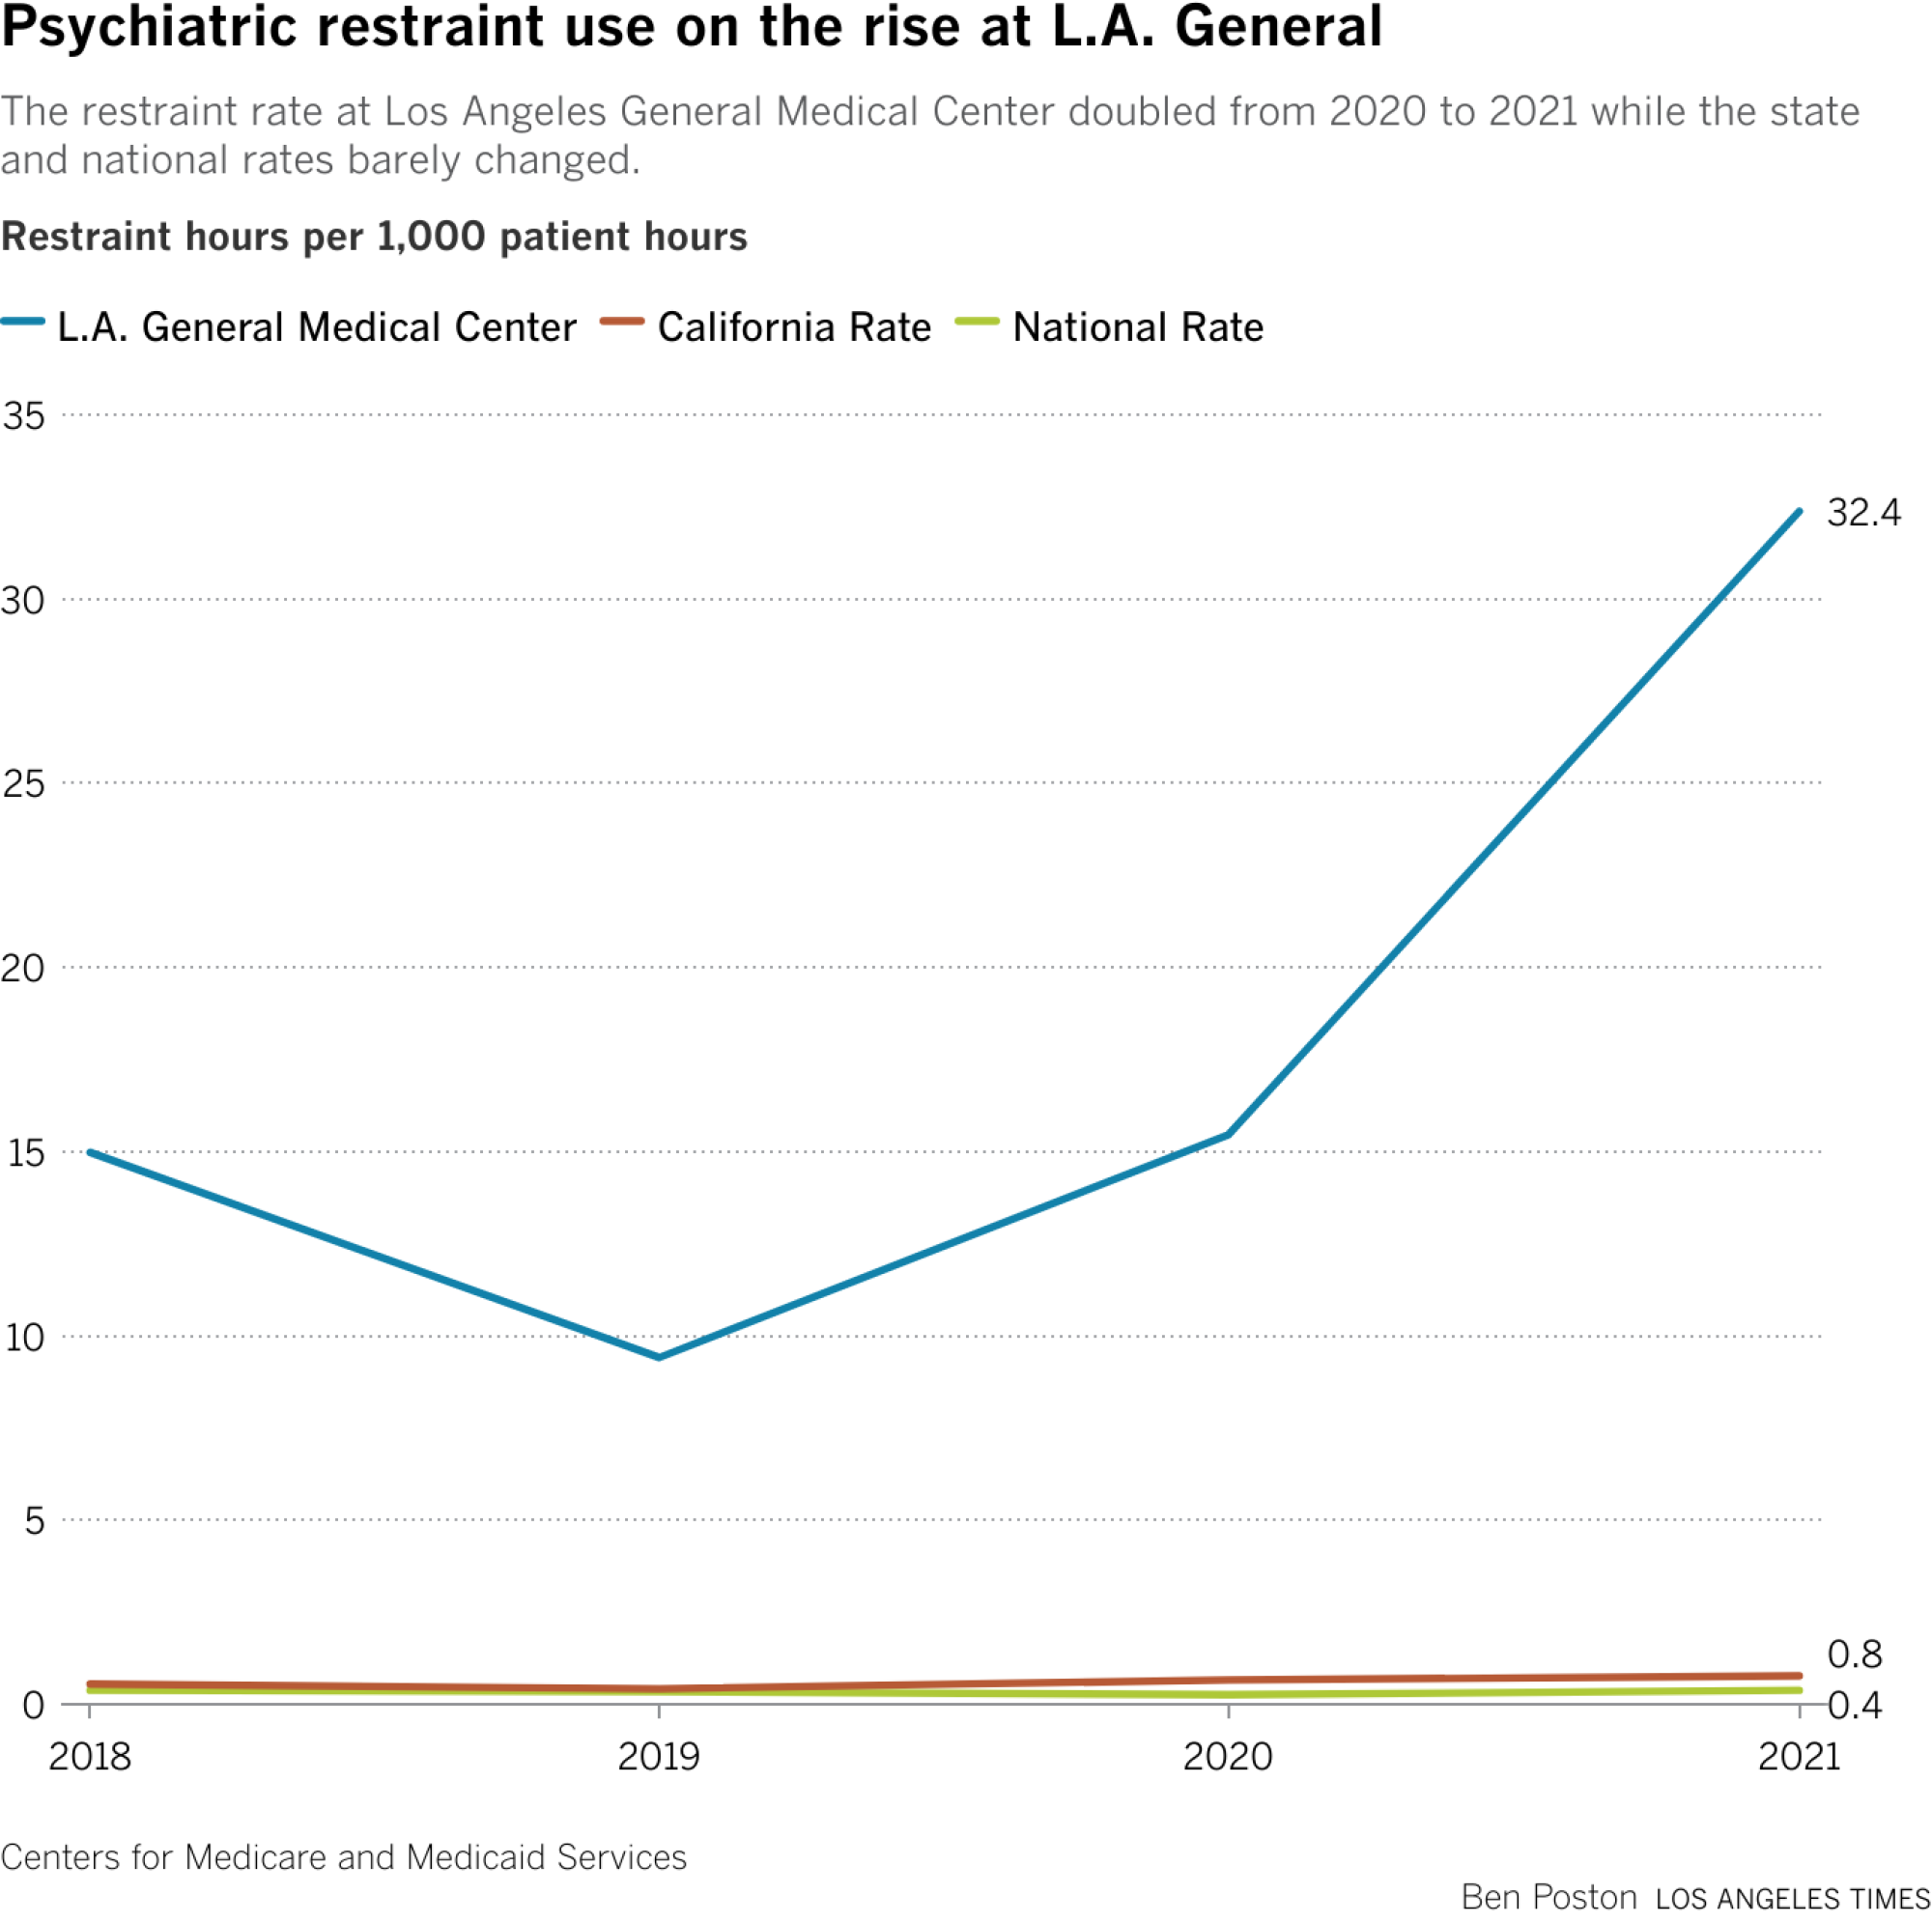 The restraint rate at Los Angeles General Medical Center doubled from 2020 to 2021 while the state and national rates barely changed.